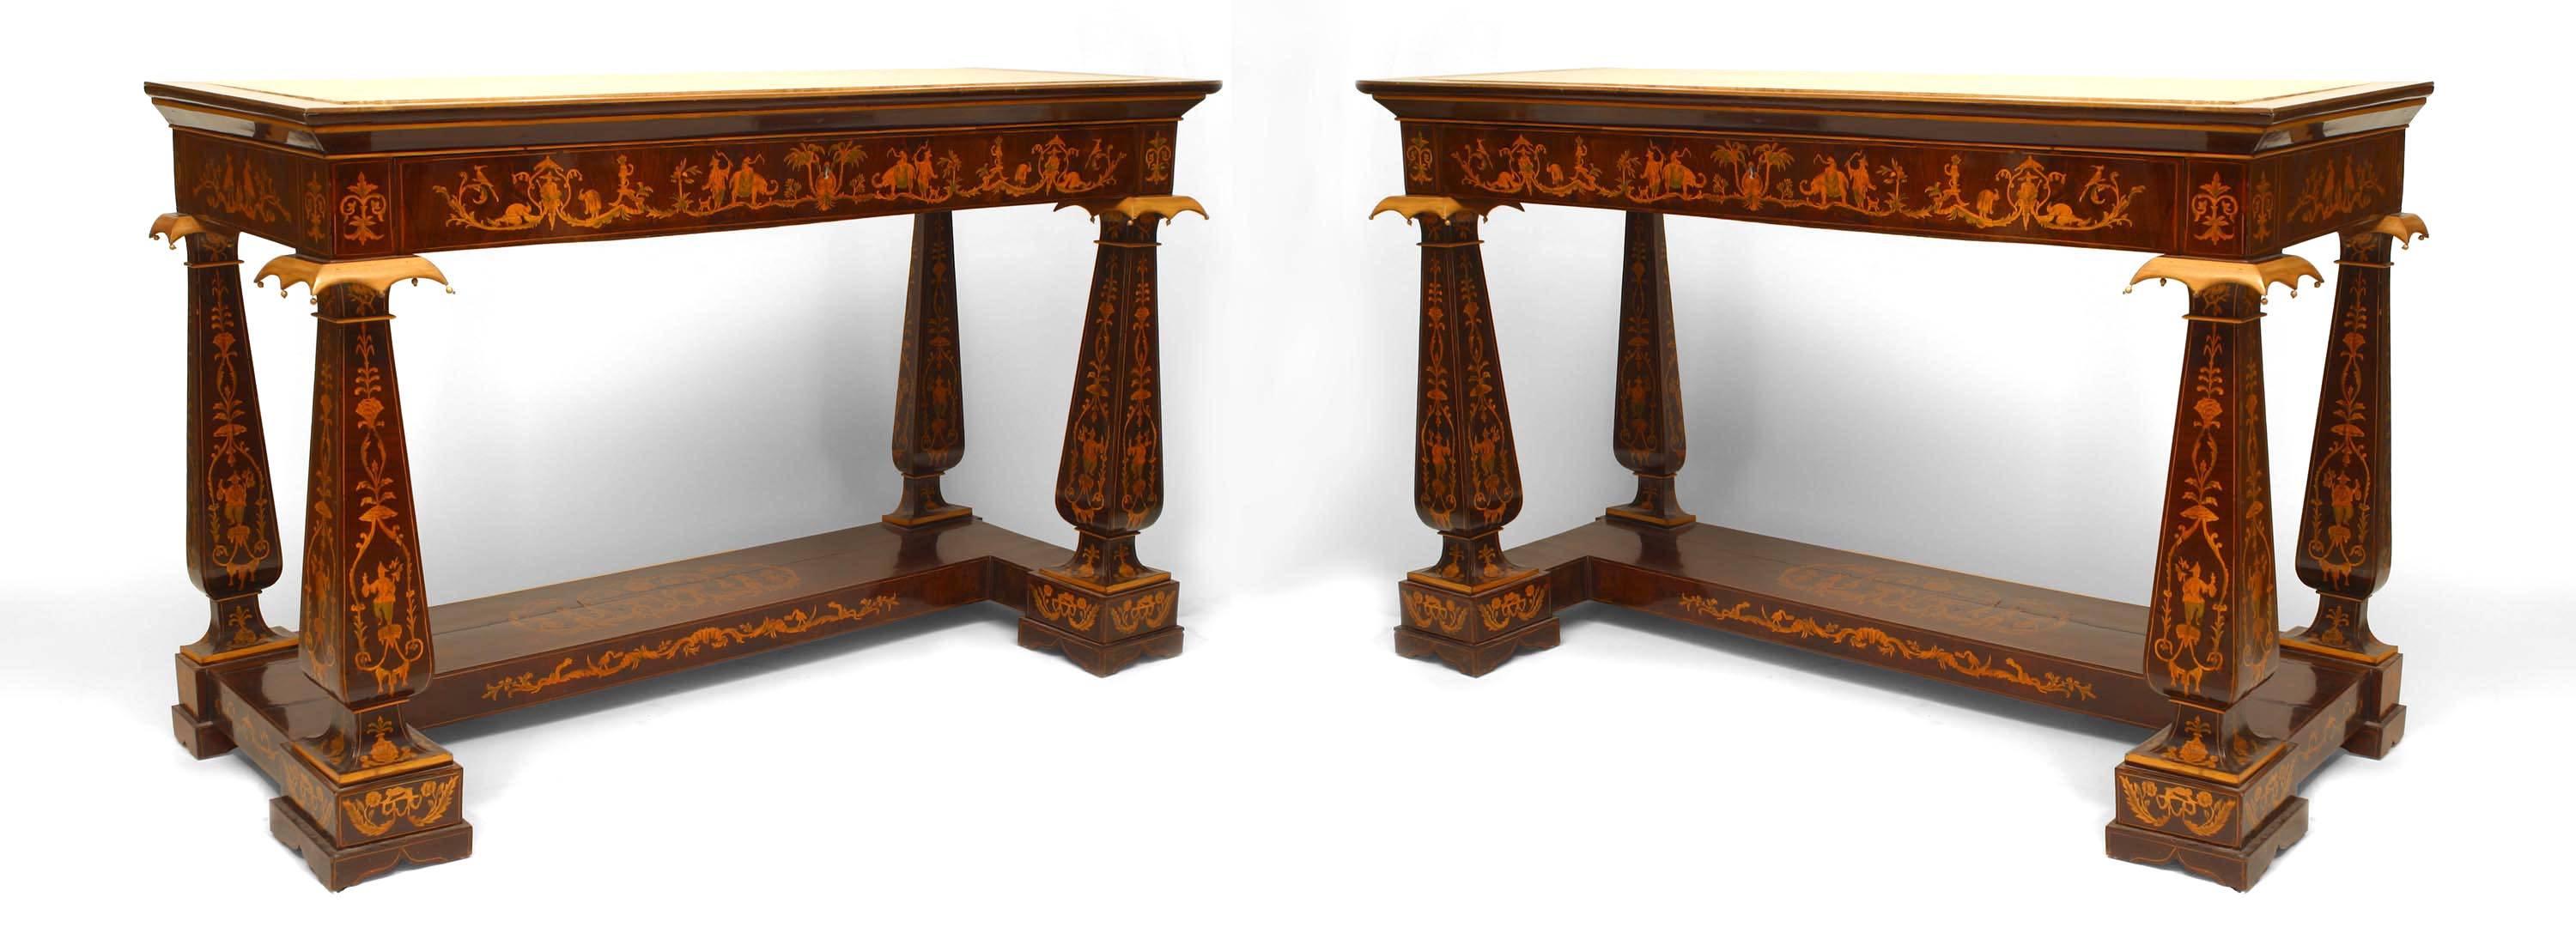 Pair of Italian Neo-classic (19th Century) rosewood & fruitwood Chinoiserie marquetry console tables with inset marble tops above a frieze drawer. (PRICED AS Pair)
